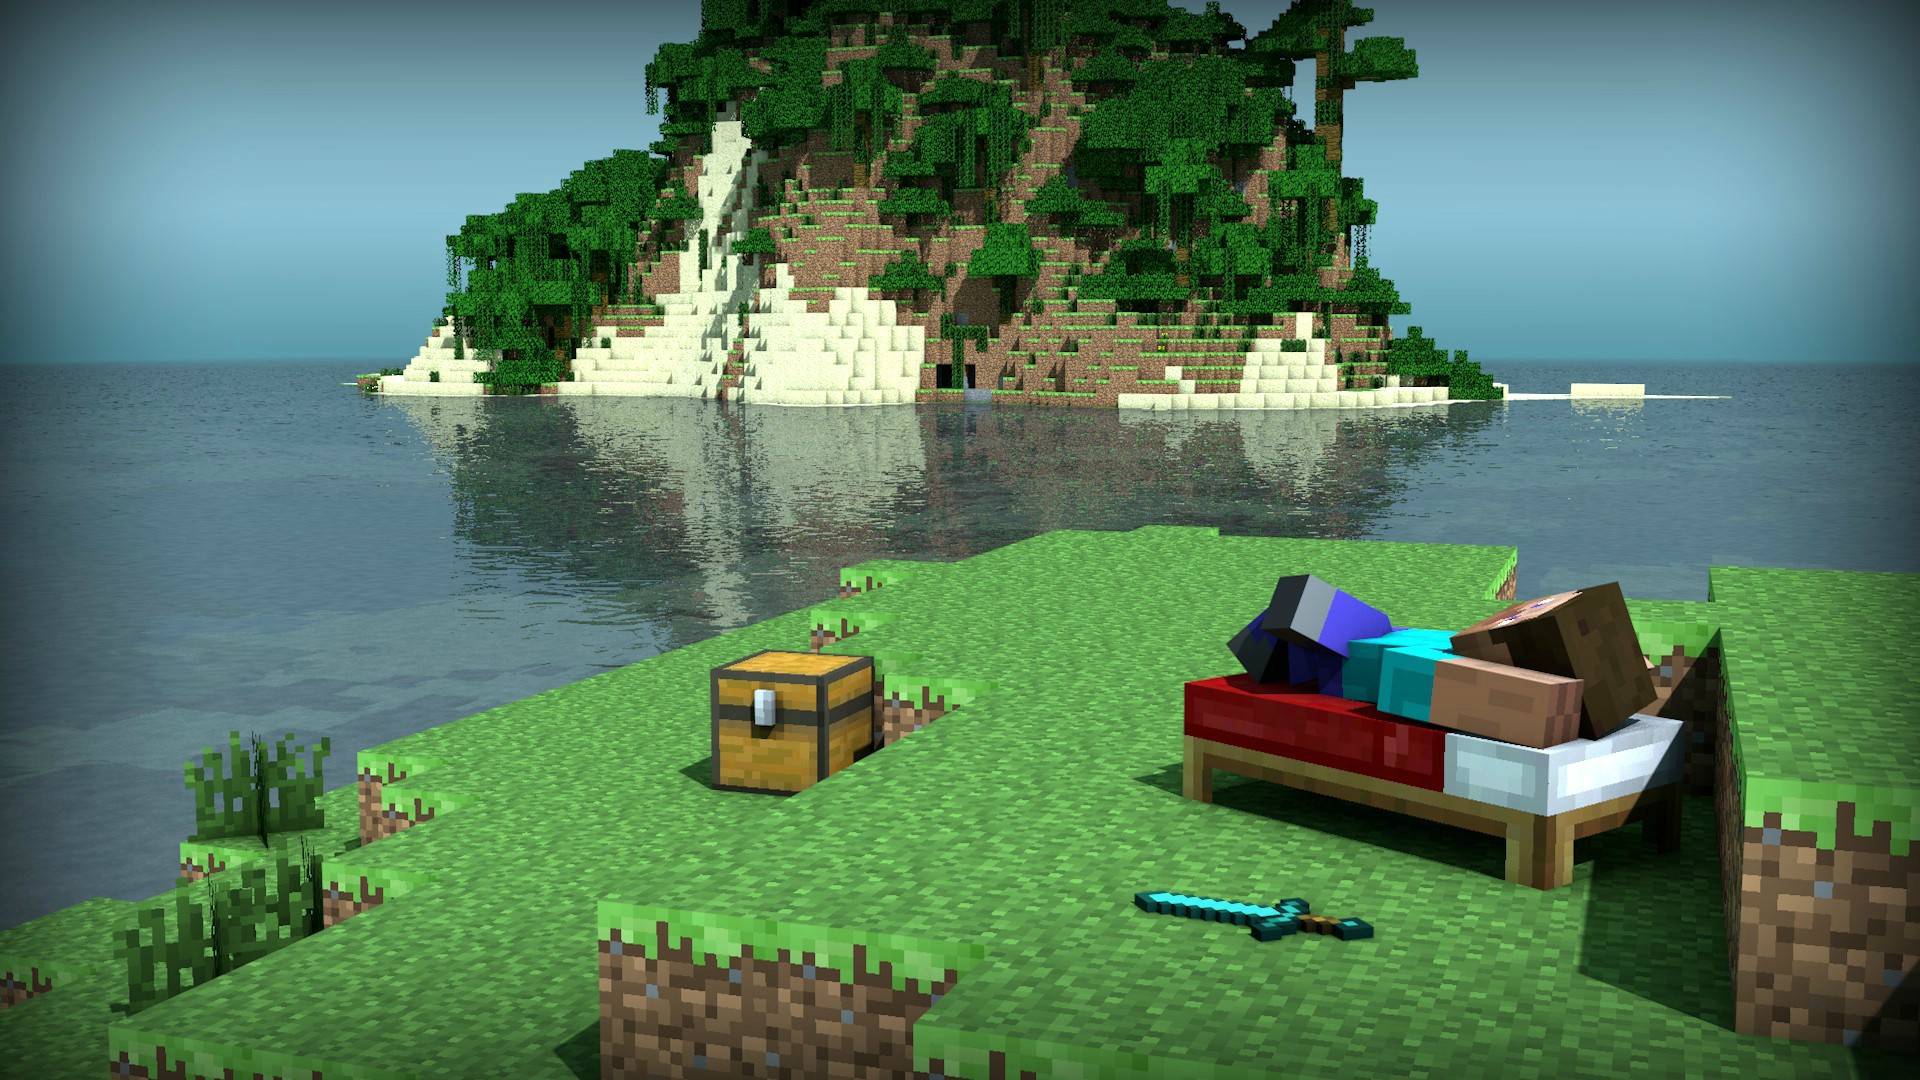 minecraft-is-awesome-2013-september-2013